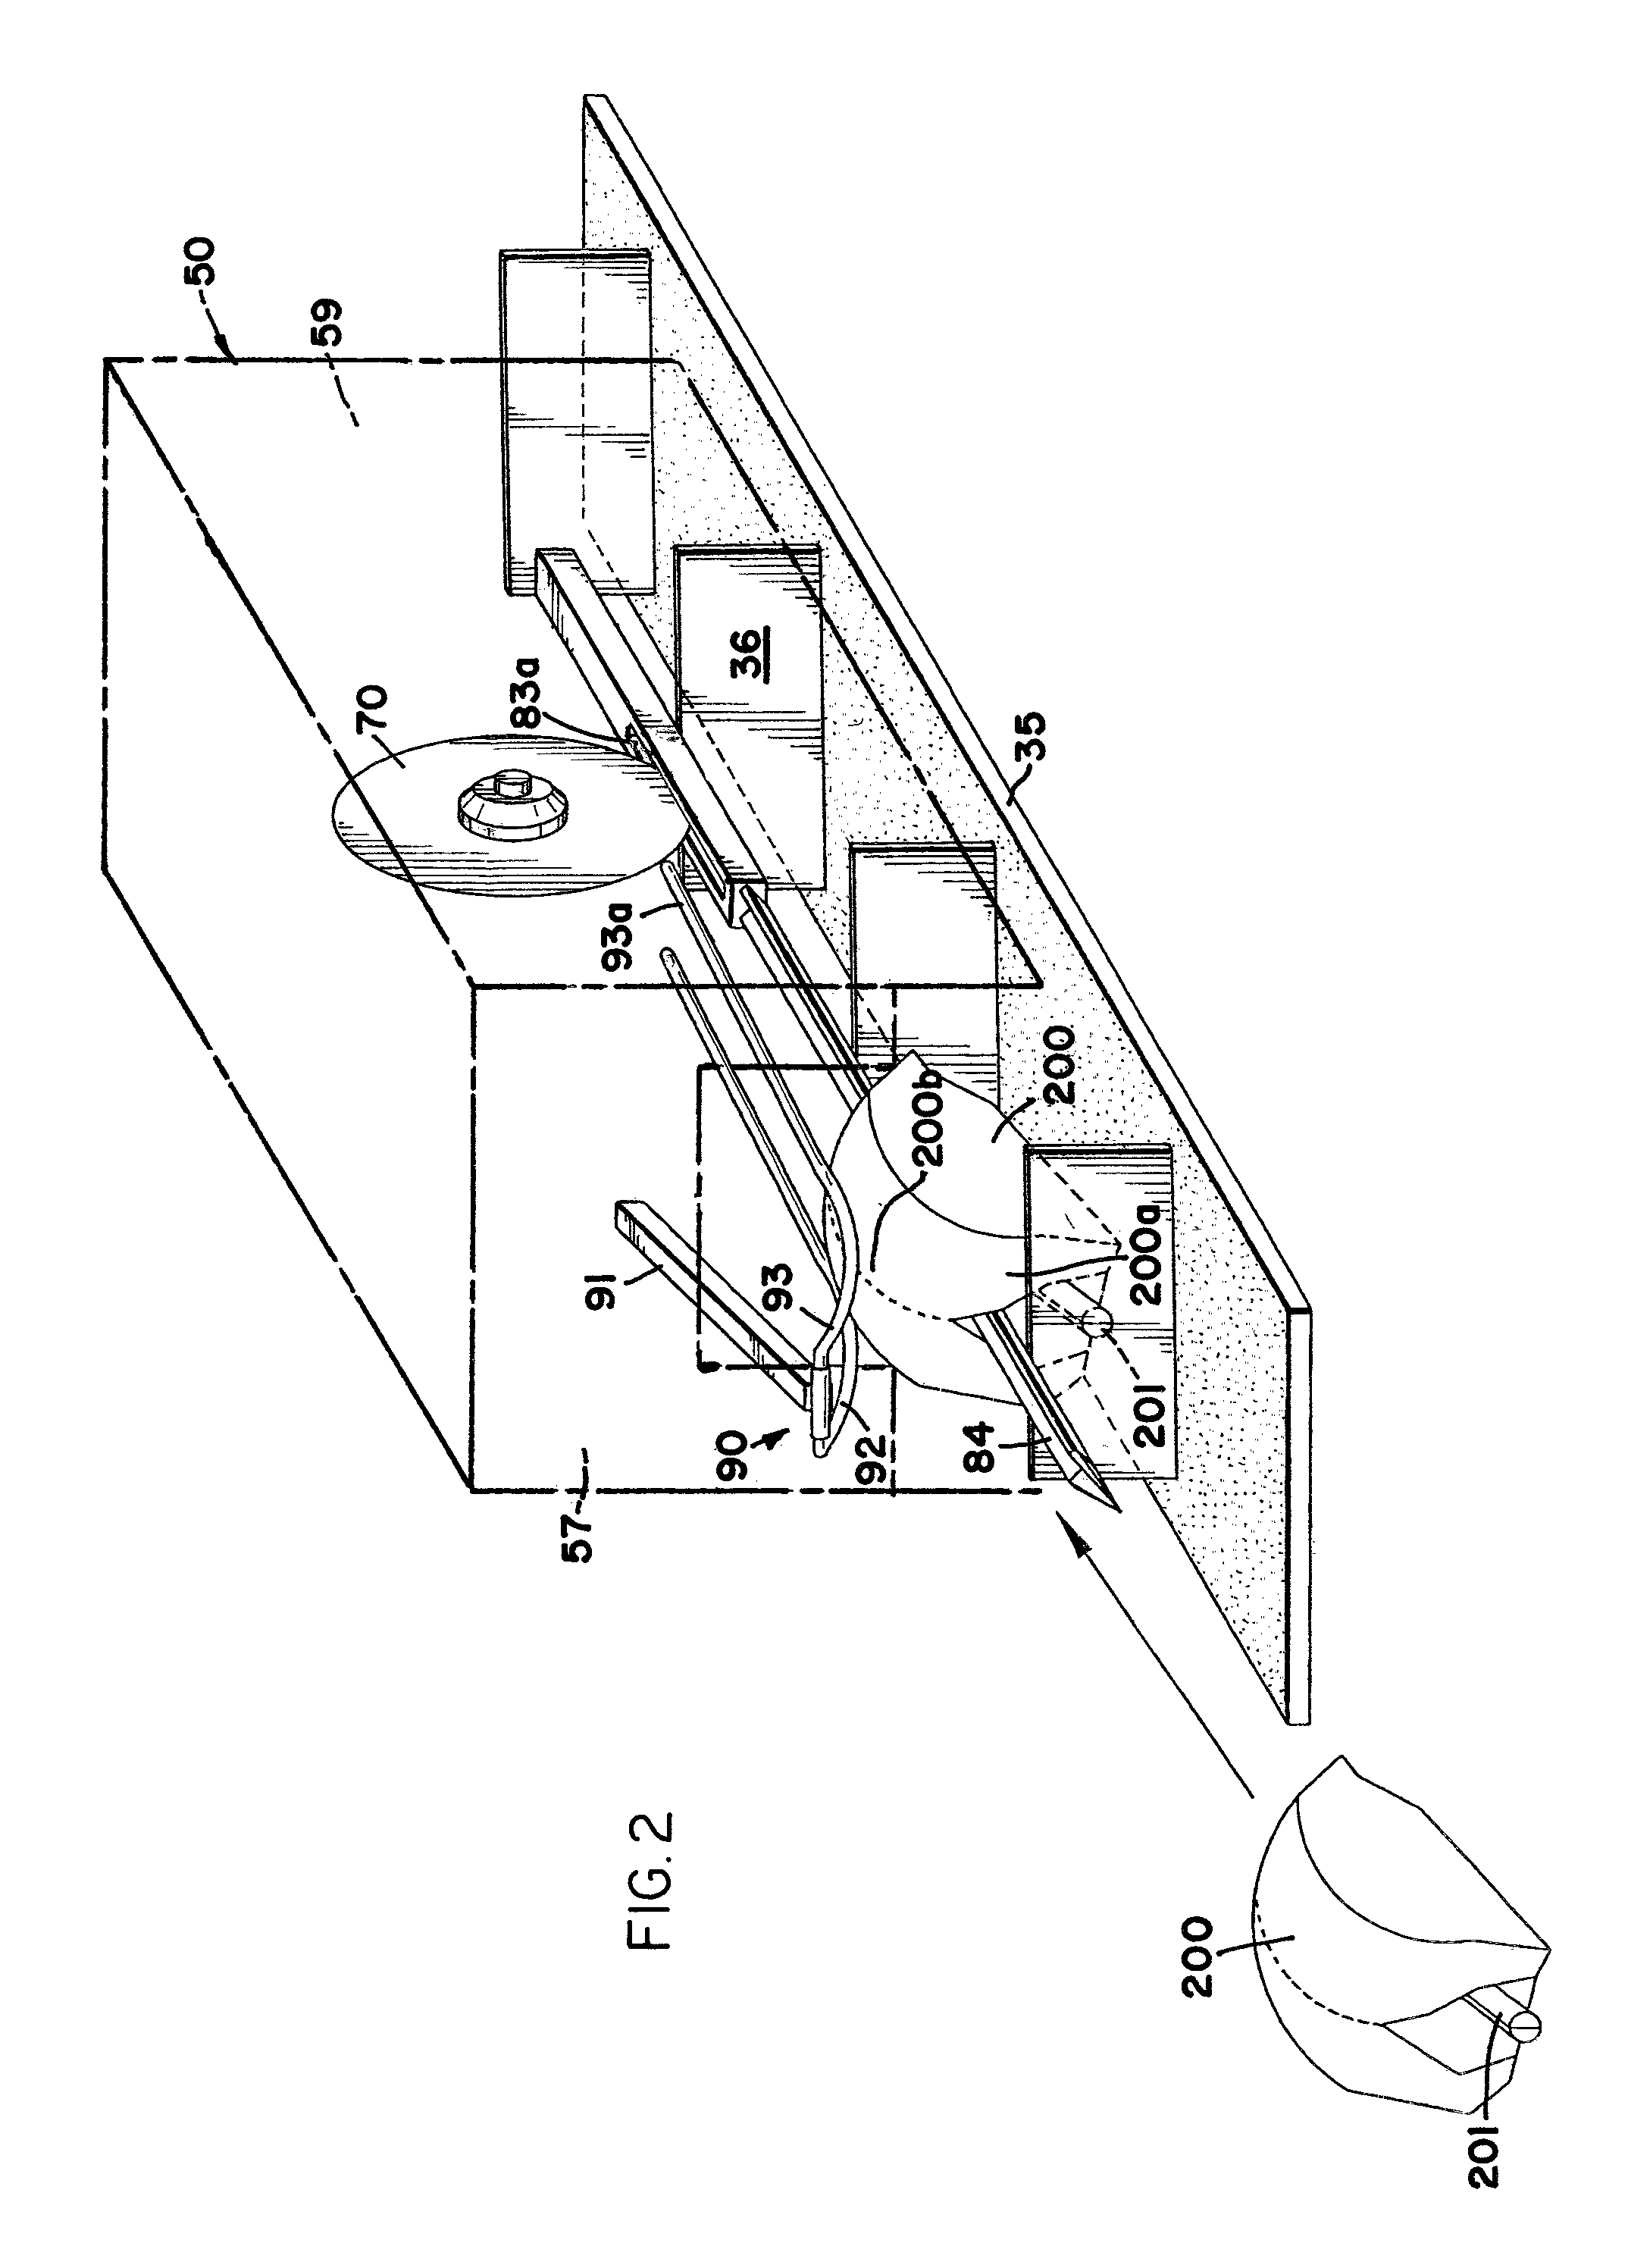 Poultry breast saw apparatus